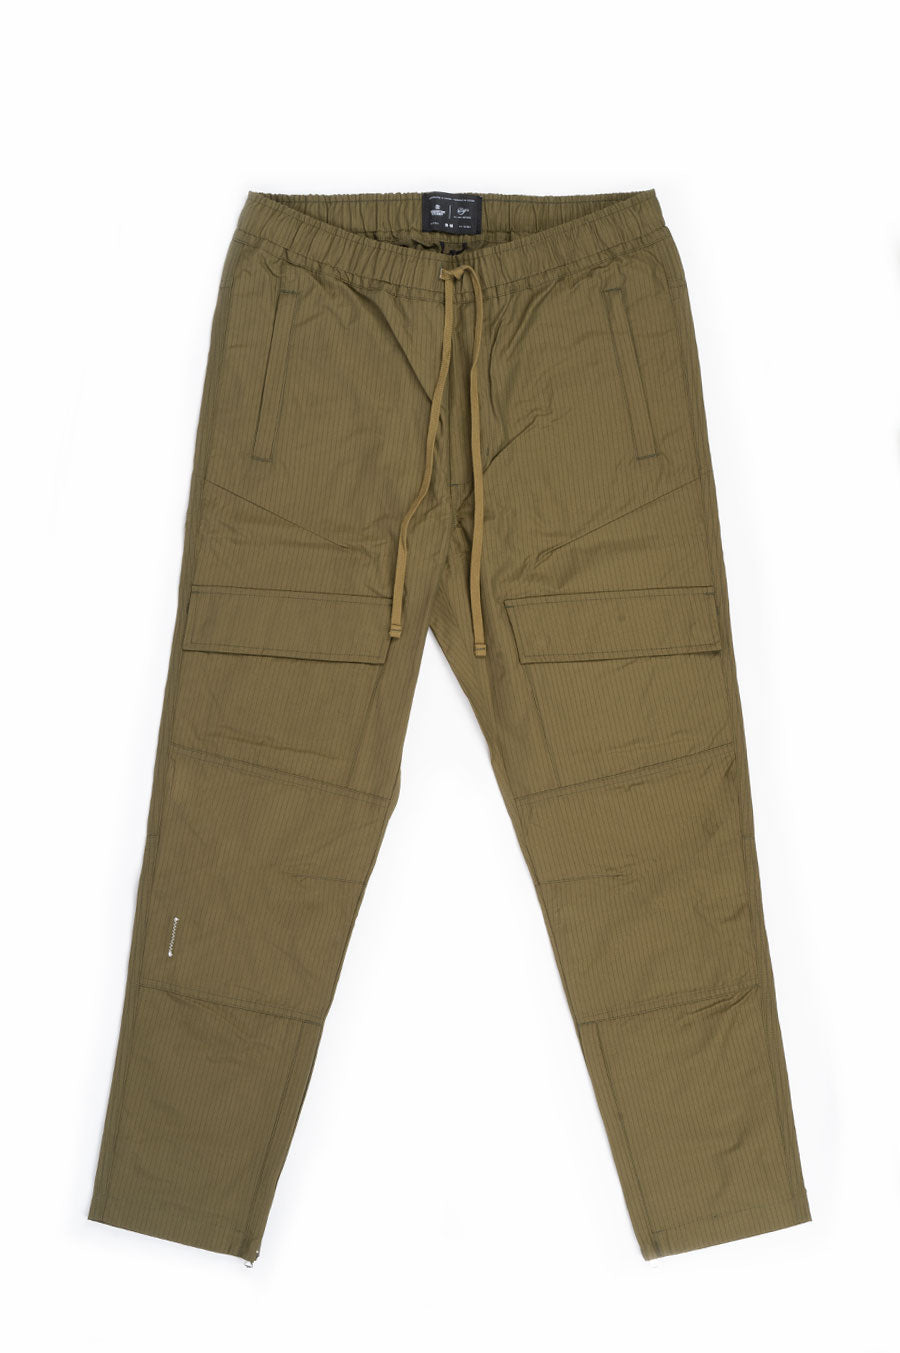 BLENDS CARGO REIGNING – PANT CHAMP S04 RIPSTOP MOSS